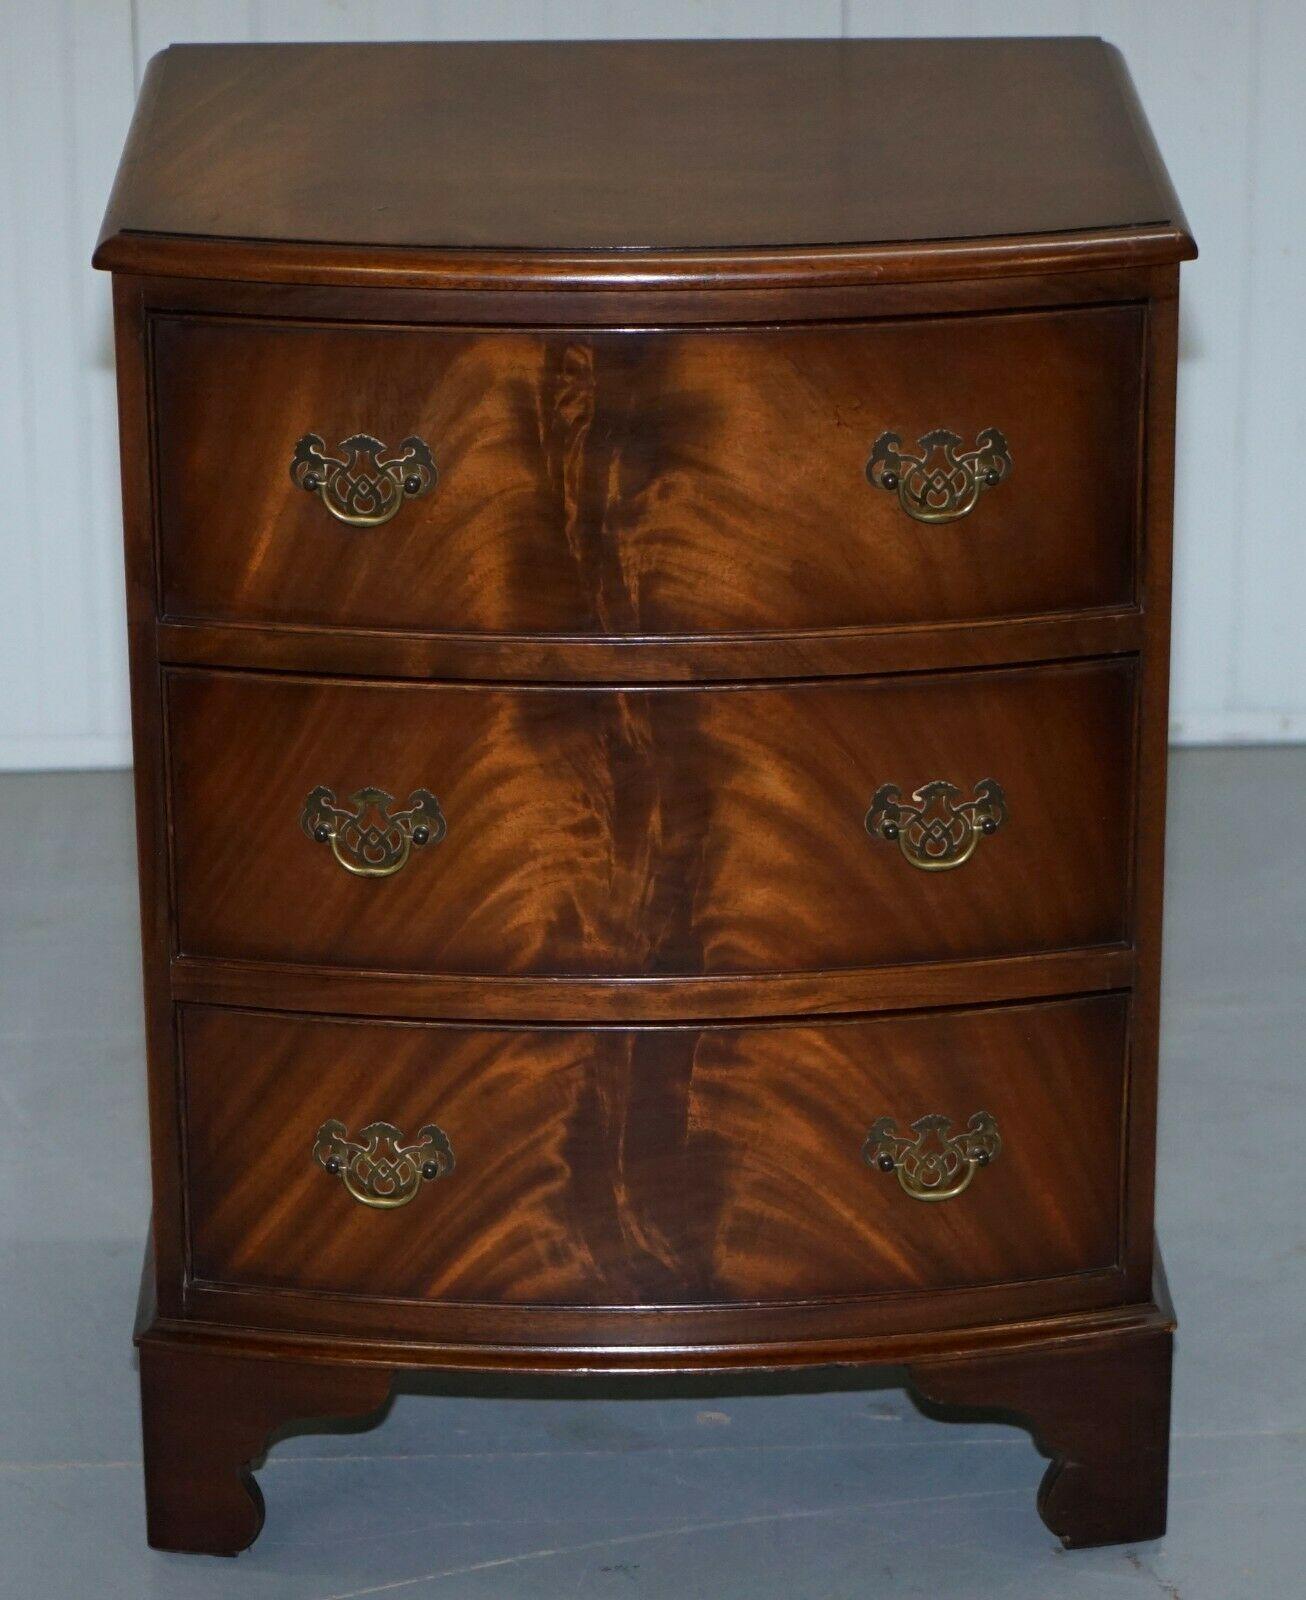 We are delighted to this lovely small Burton Furniture LTD vintage 1960s flamed mahogany side table sized chest of drawers

A very good looking well-made and function chest of drawers, ideally suited as a lamp or wine table for a living area or as